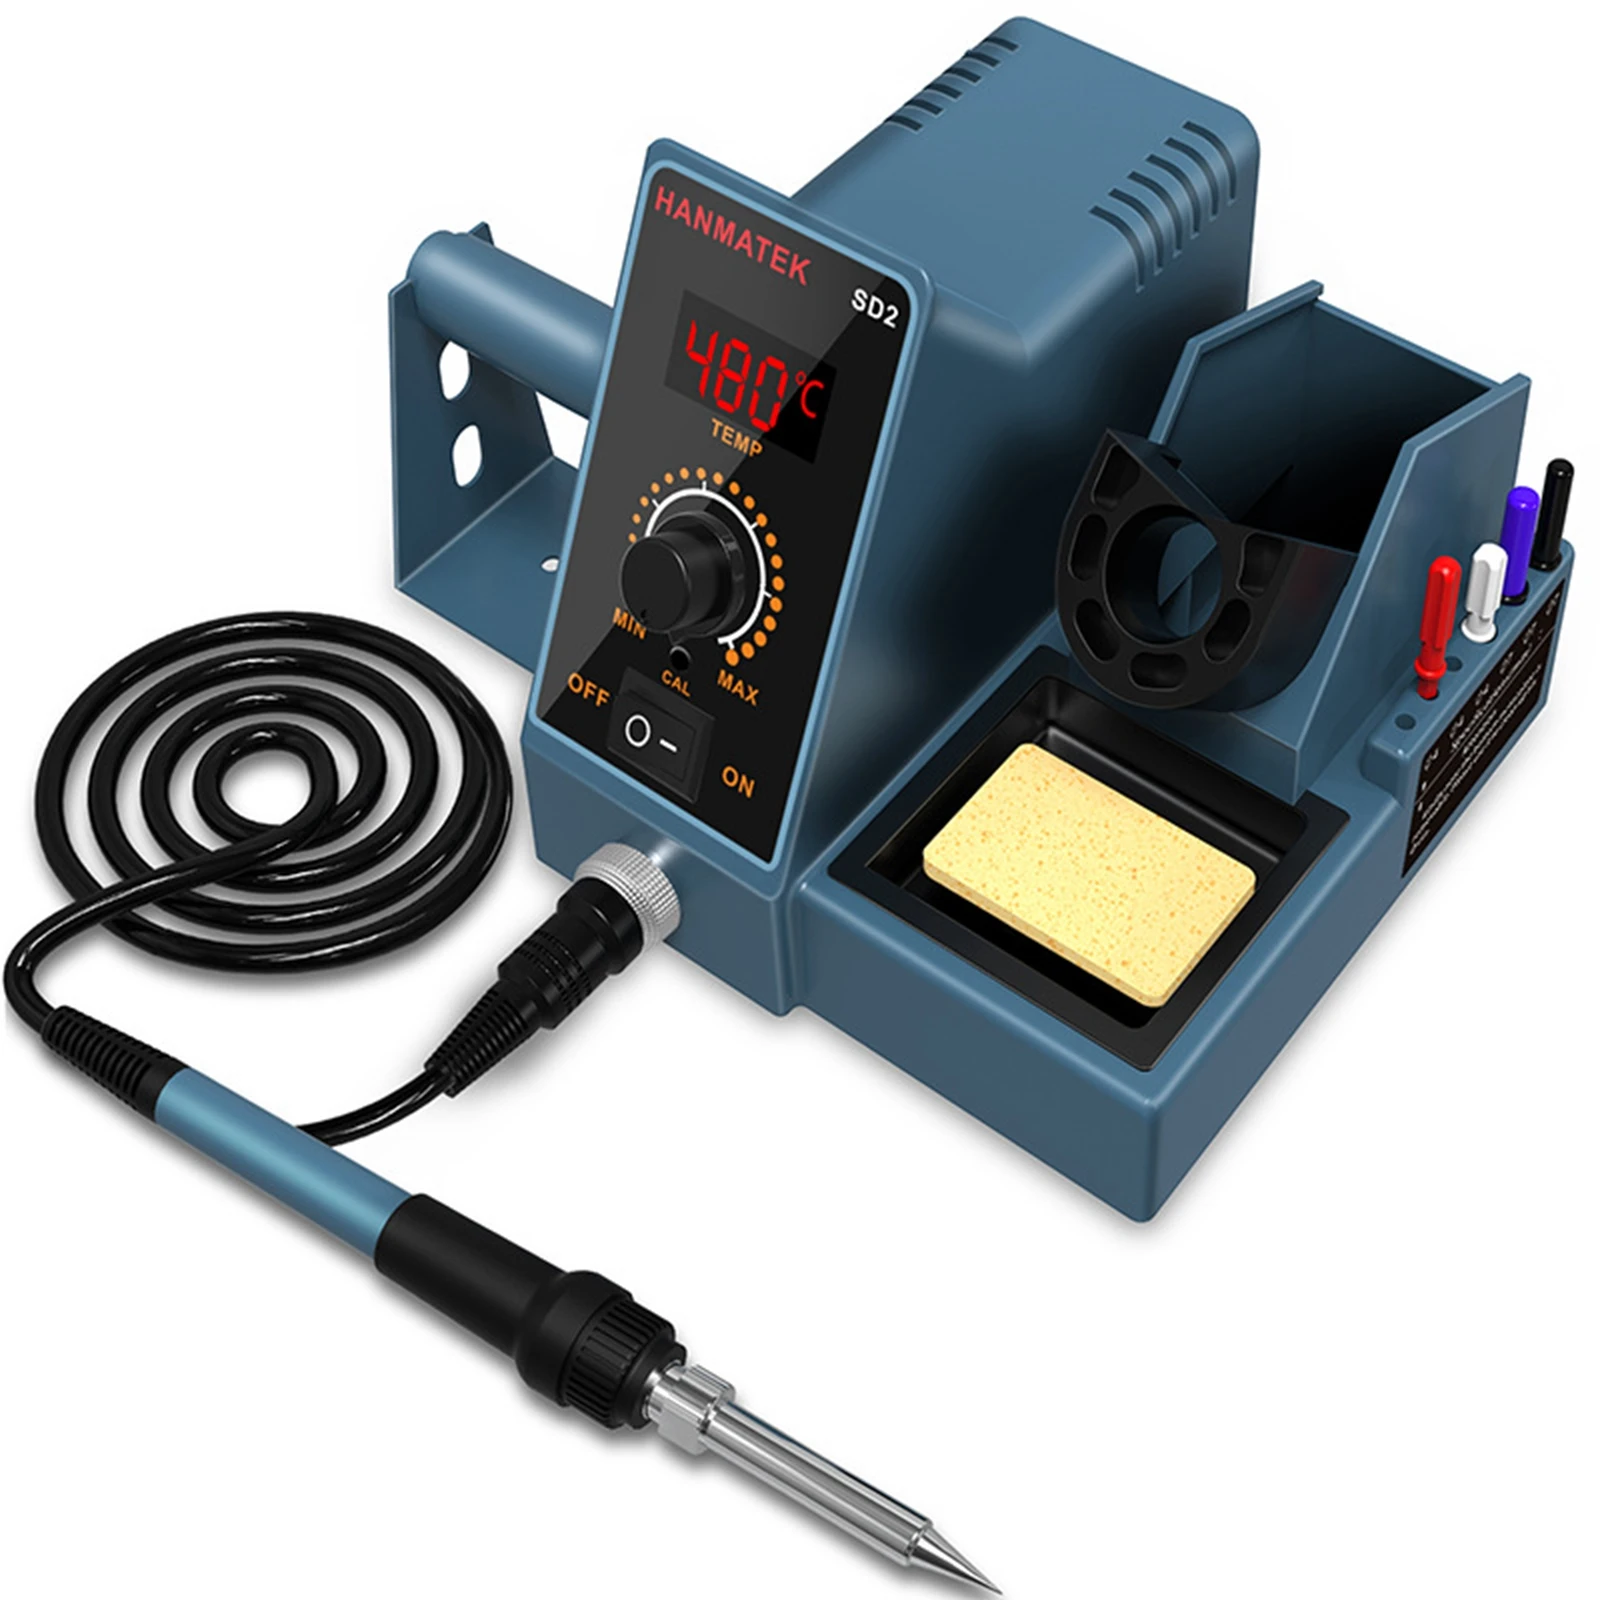 

60W SD2 SD1 Soldering Iron Station Temperature Adjustable Rapid Heating Bracket Kit Electric Soldering Irons